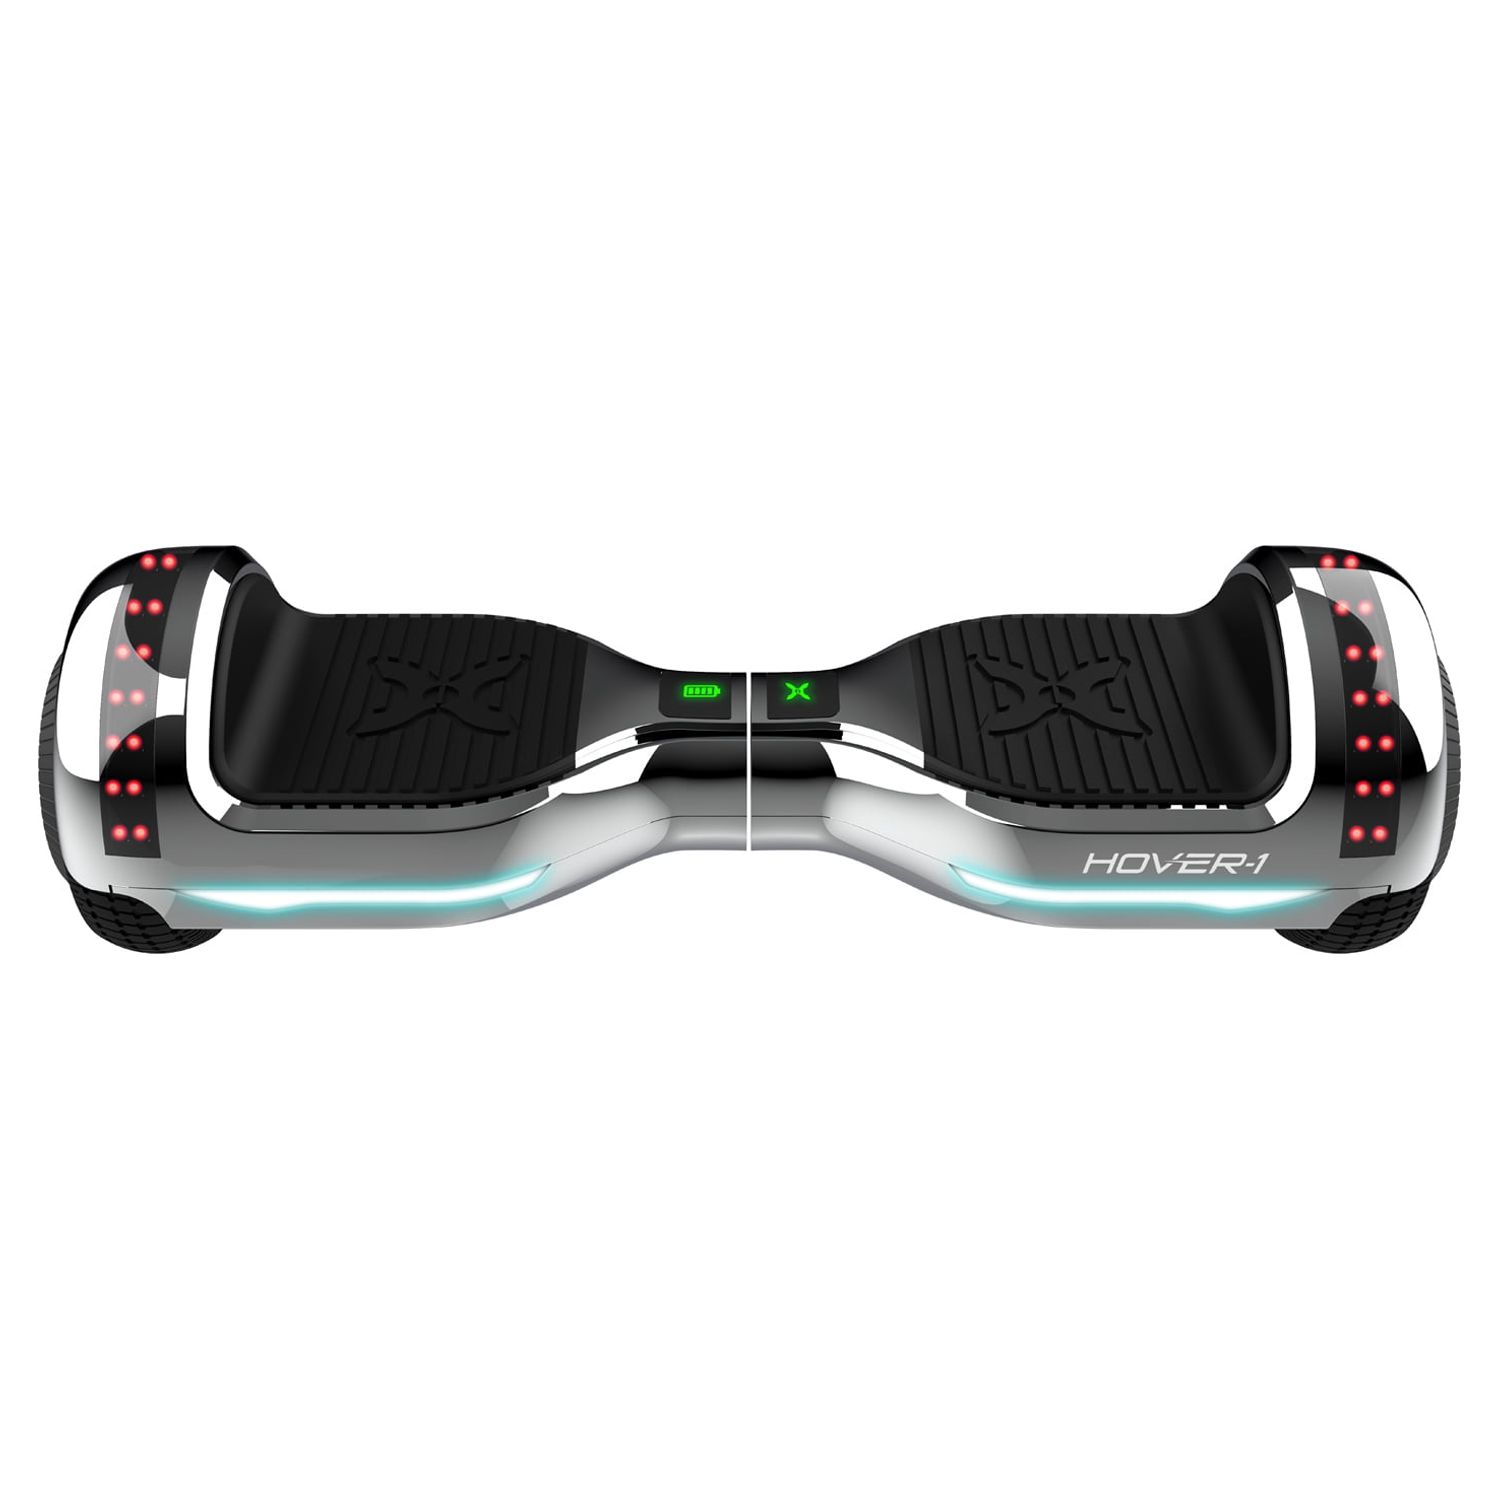 Hover-1 Matrix Hoverboard For Teens, 6.5 in Wheels, 180 lb Maximum Weight, LED Lights & Bluetooth Speaker, Silver - image 2 of 12